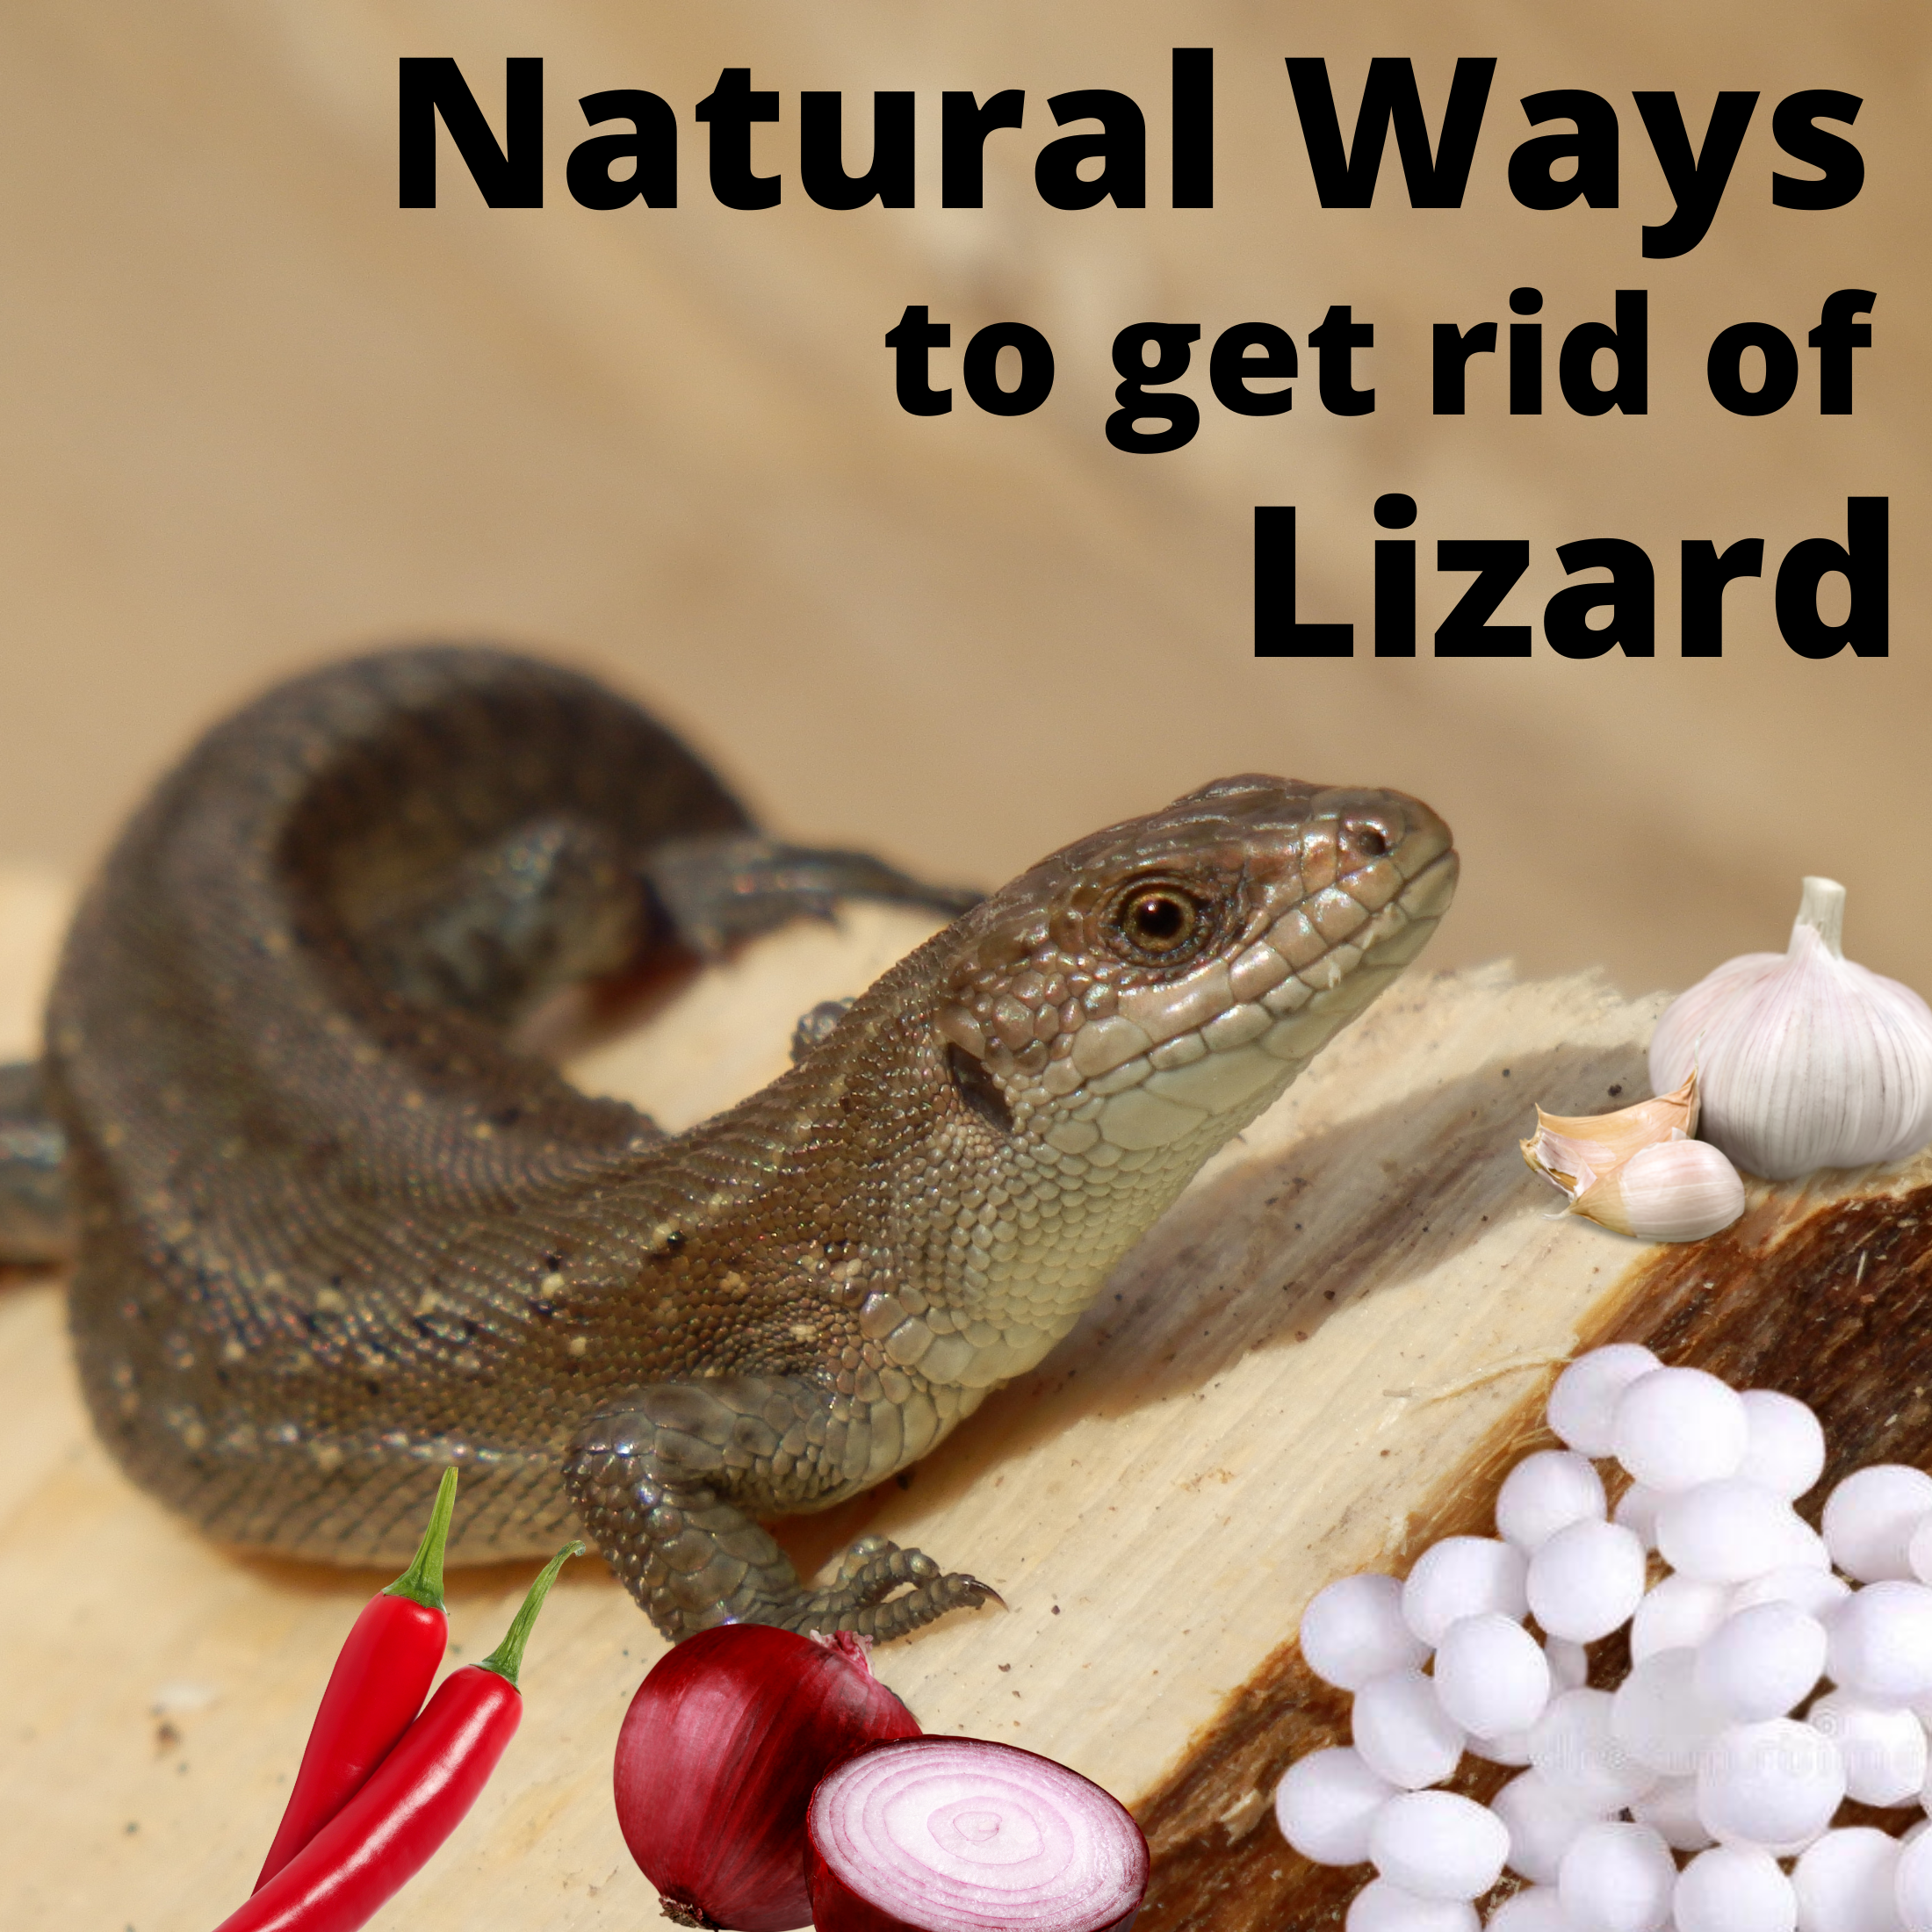 How to get rid of the lizard without killing them?